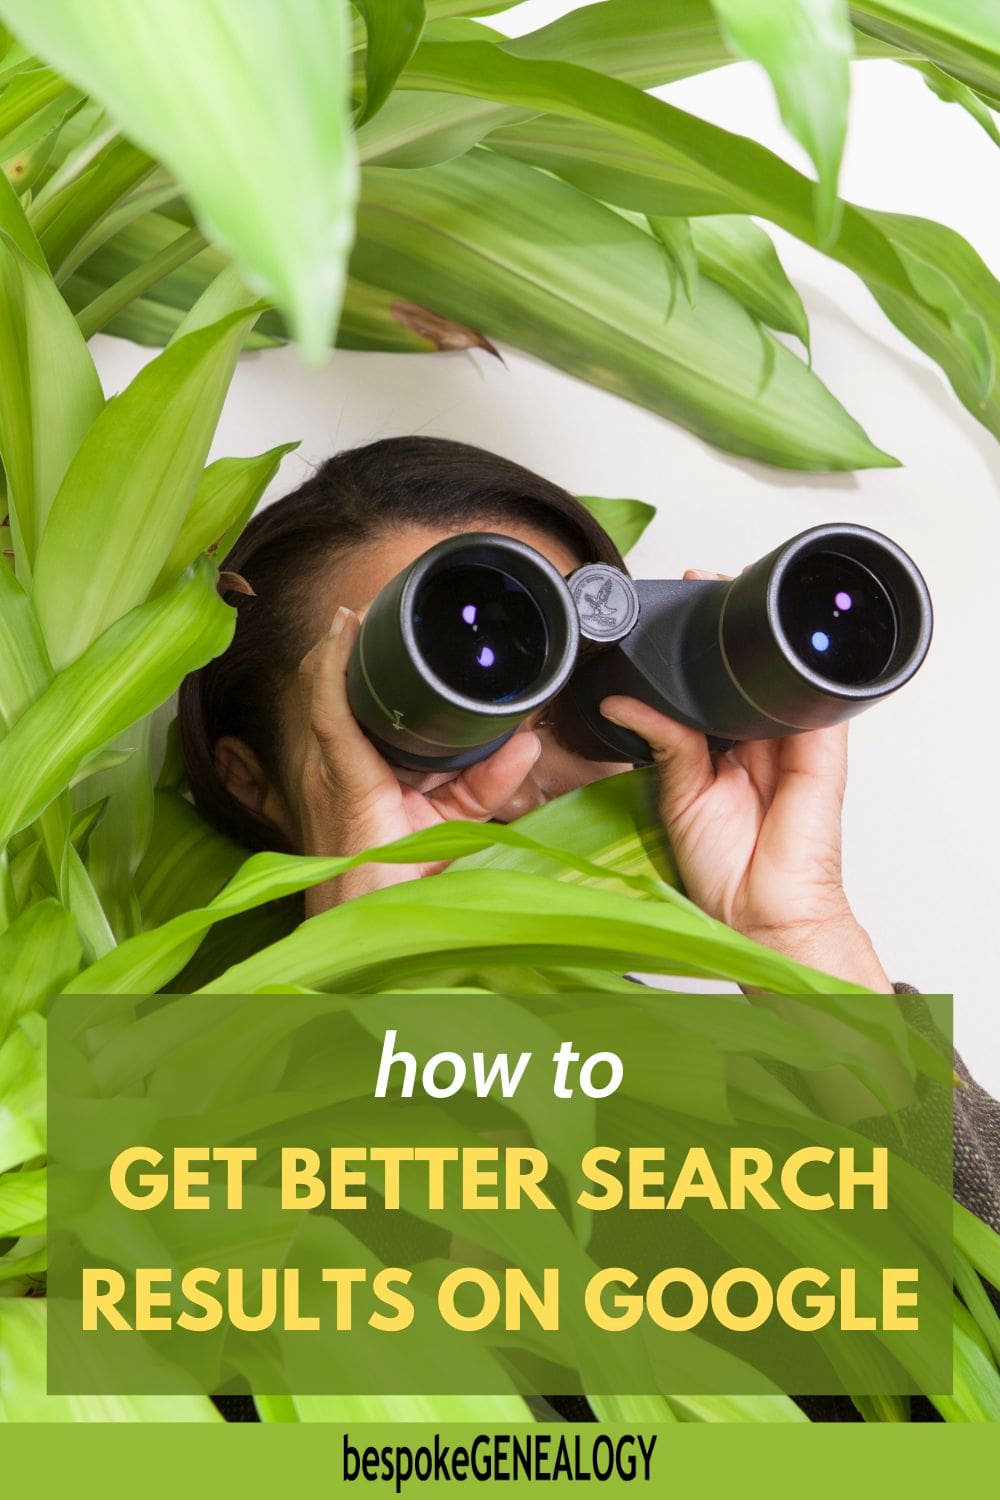 Pinterest pin. How to get better search results on Google. Close up picture of someone looking through binoculars from behind a large plant.